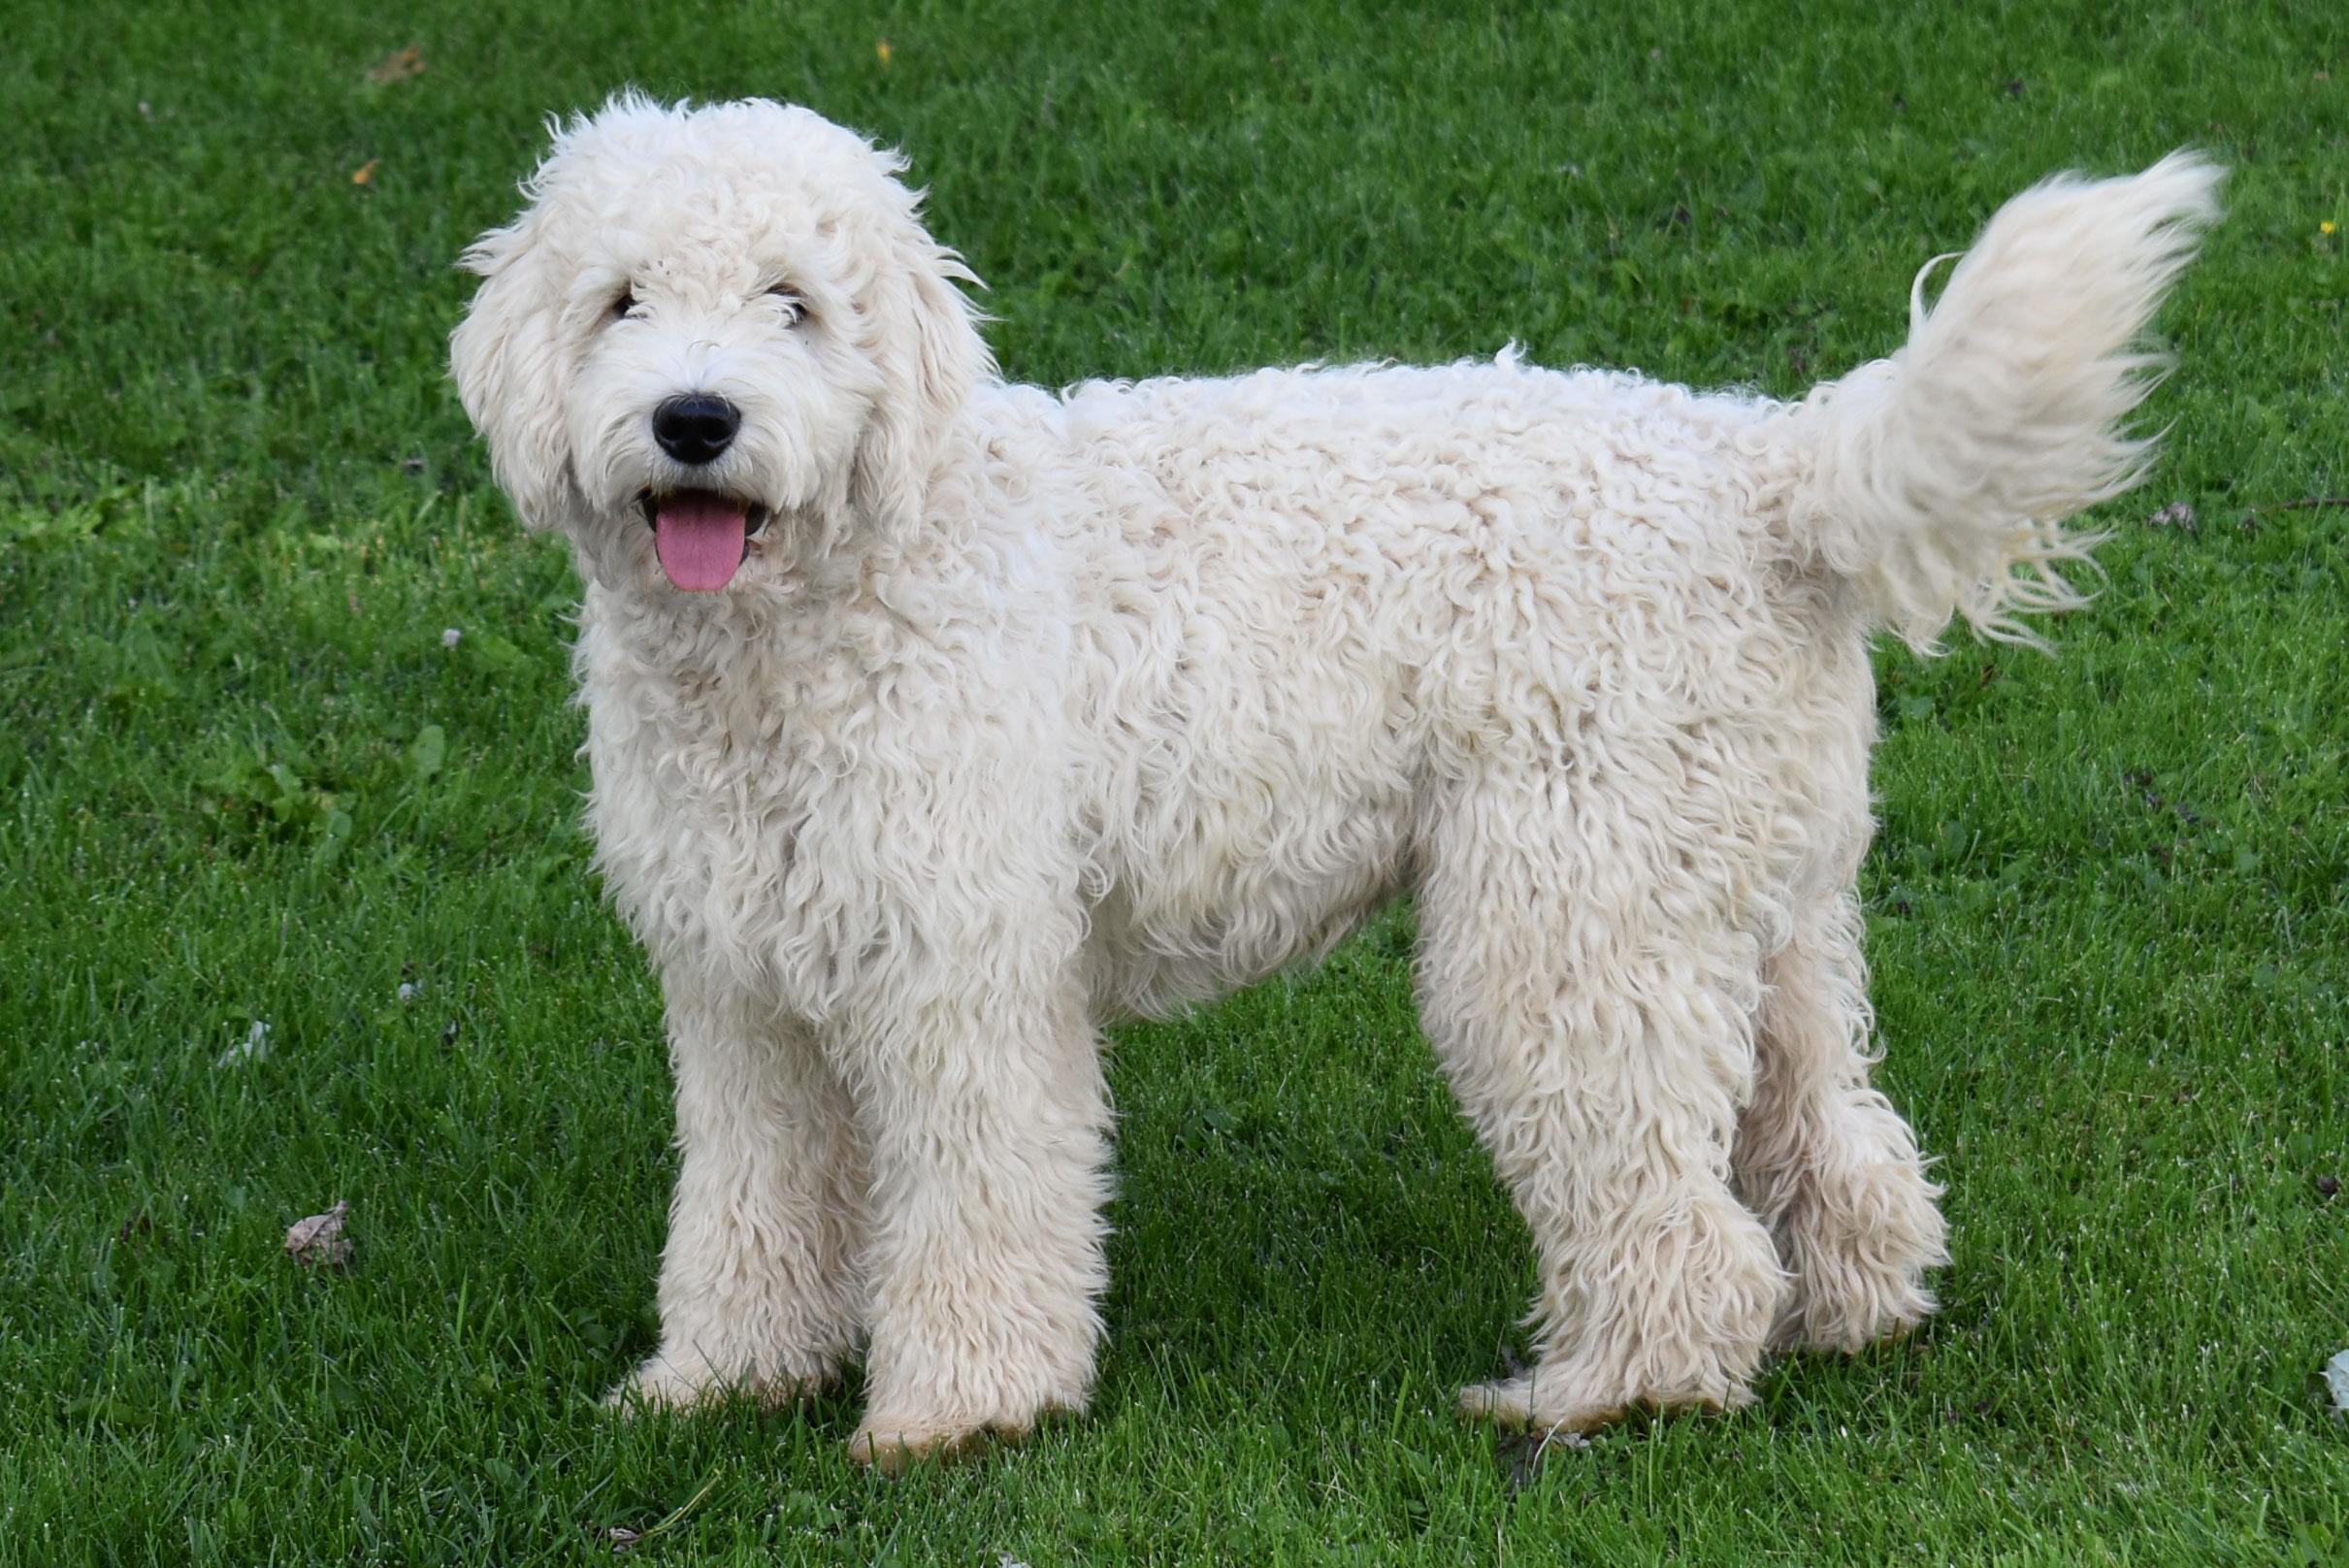  White Standard F1 Golden Doodle standing in the grass at Crosshill Doodles in Kitchener-Waterloo area. 